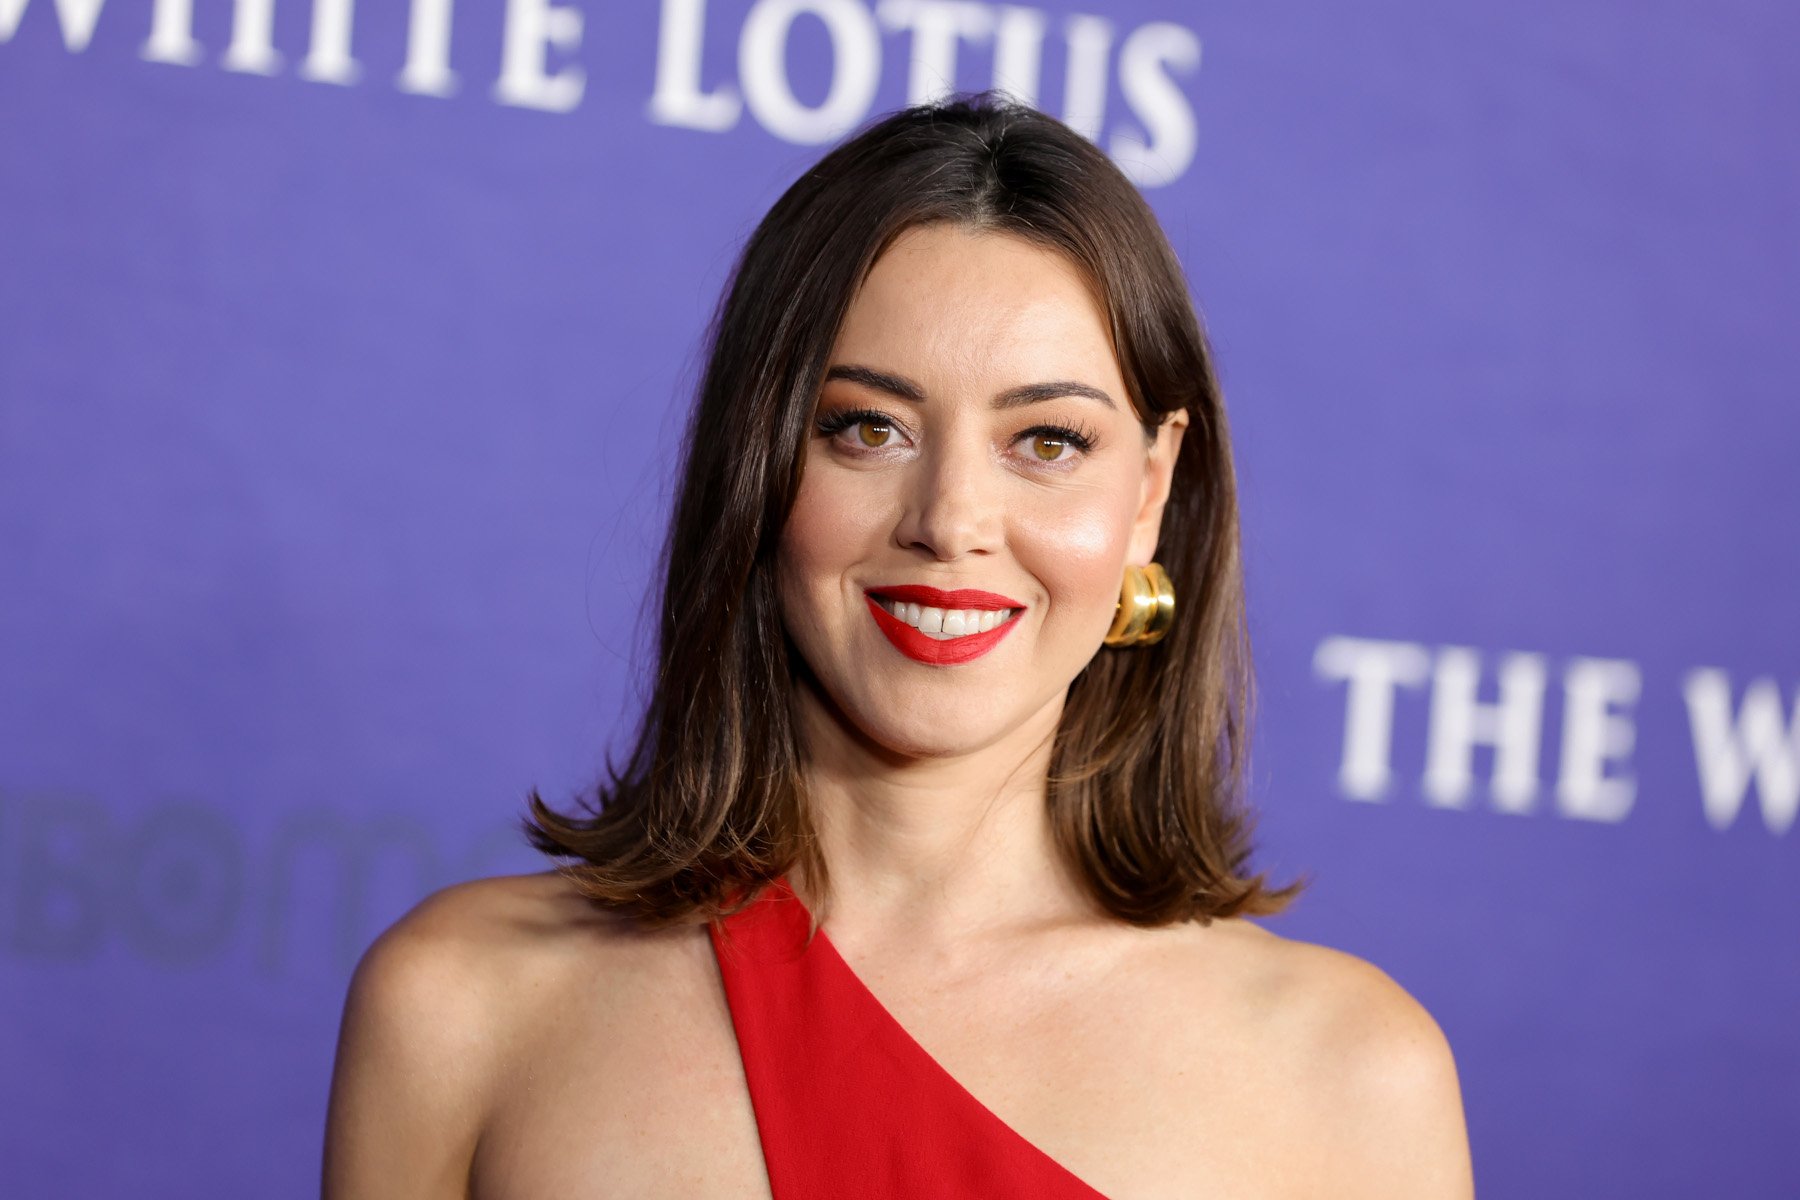 'Parks and Rec' cast member Aubrey Plaza. She's standing in front of a 'White Lotus' wall and has a red, one-strap dress on.